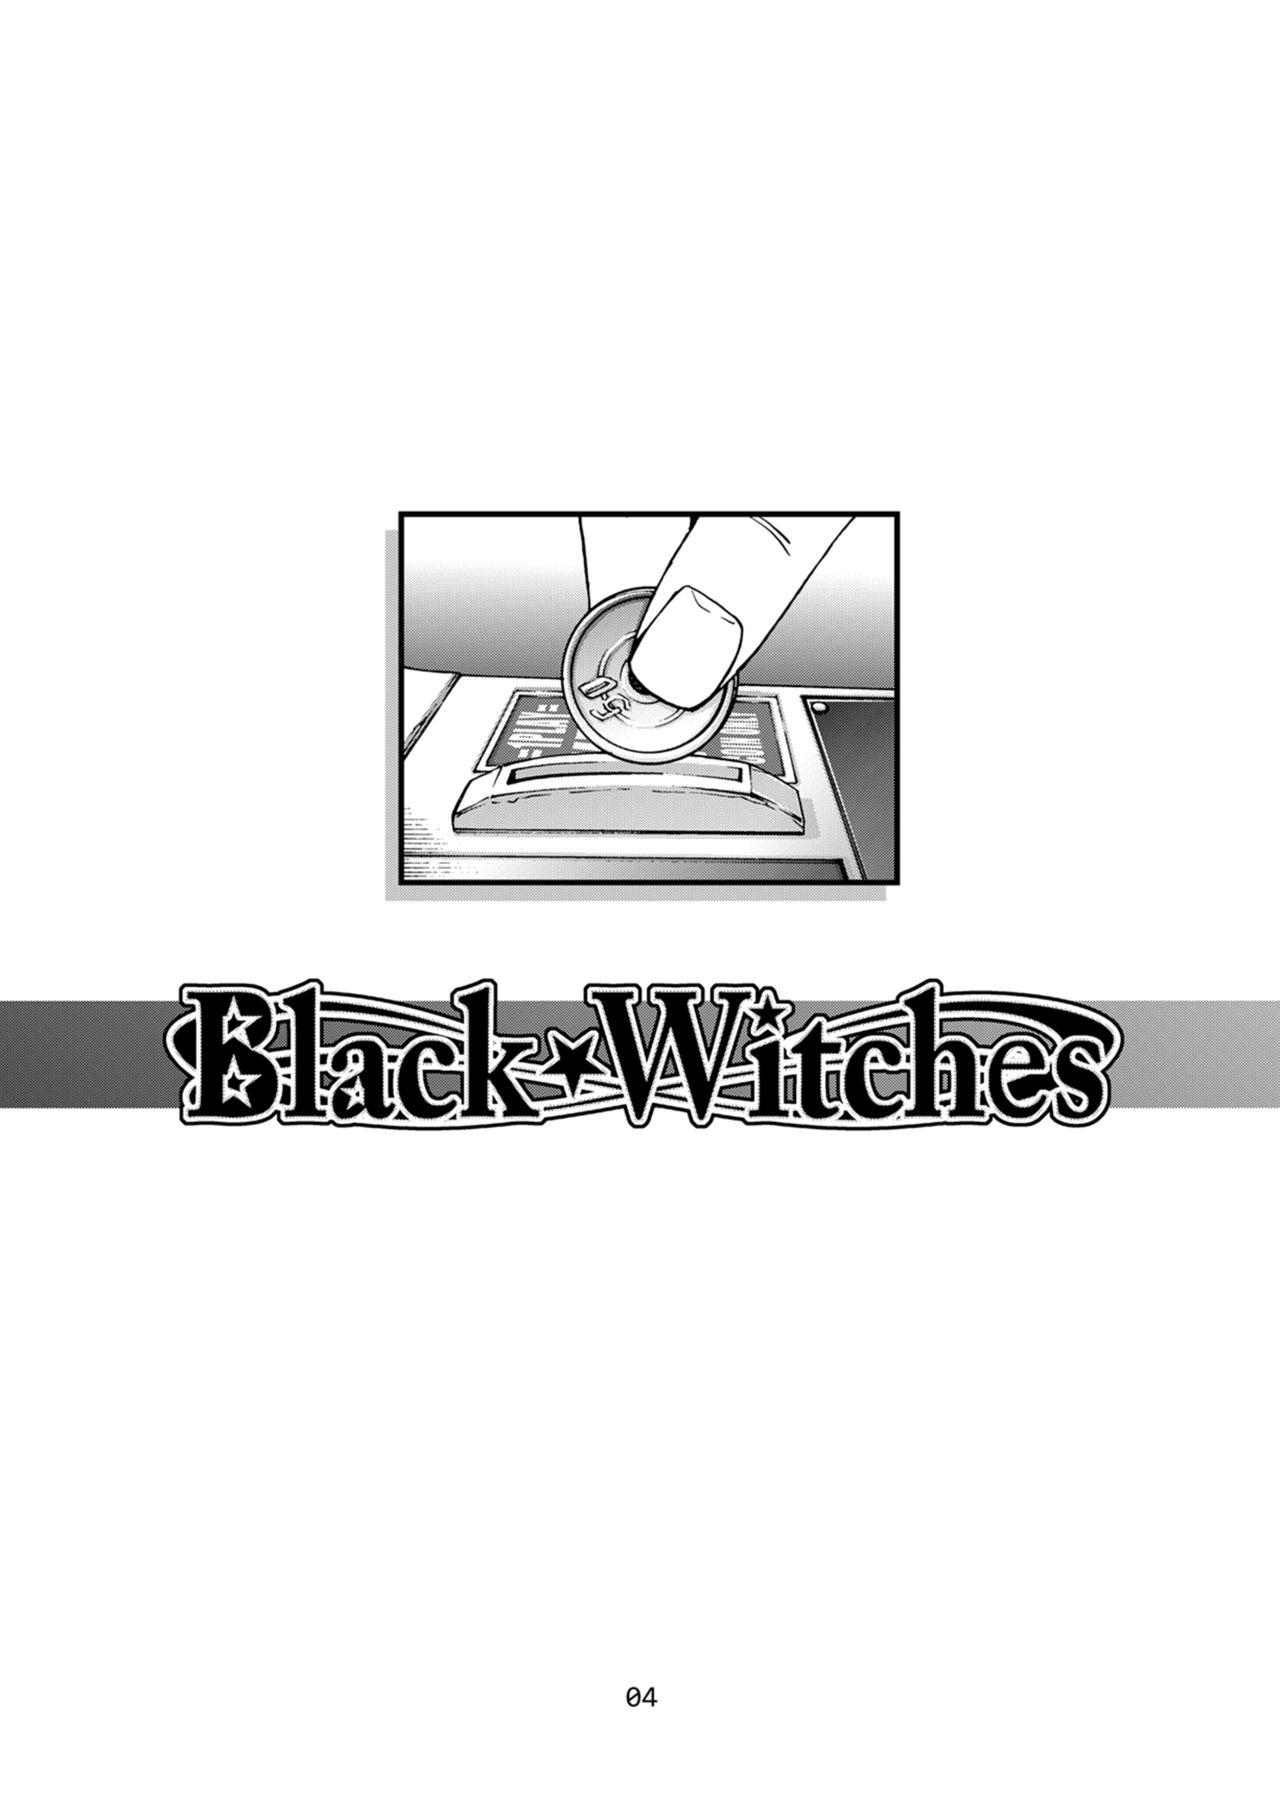 Women Fucking Black Witches - Original Doggy Style Porn - Page 4